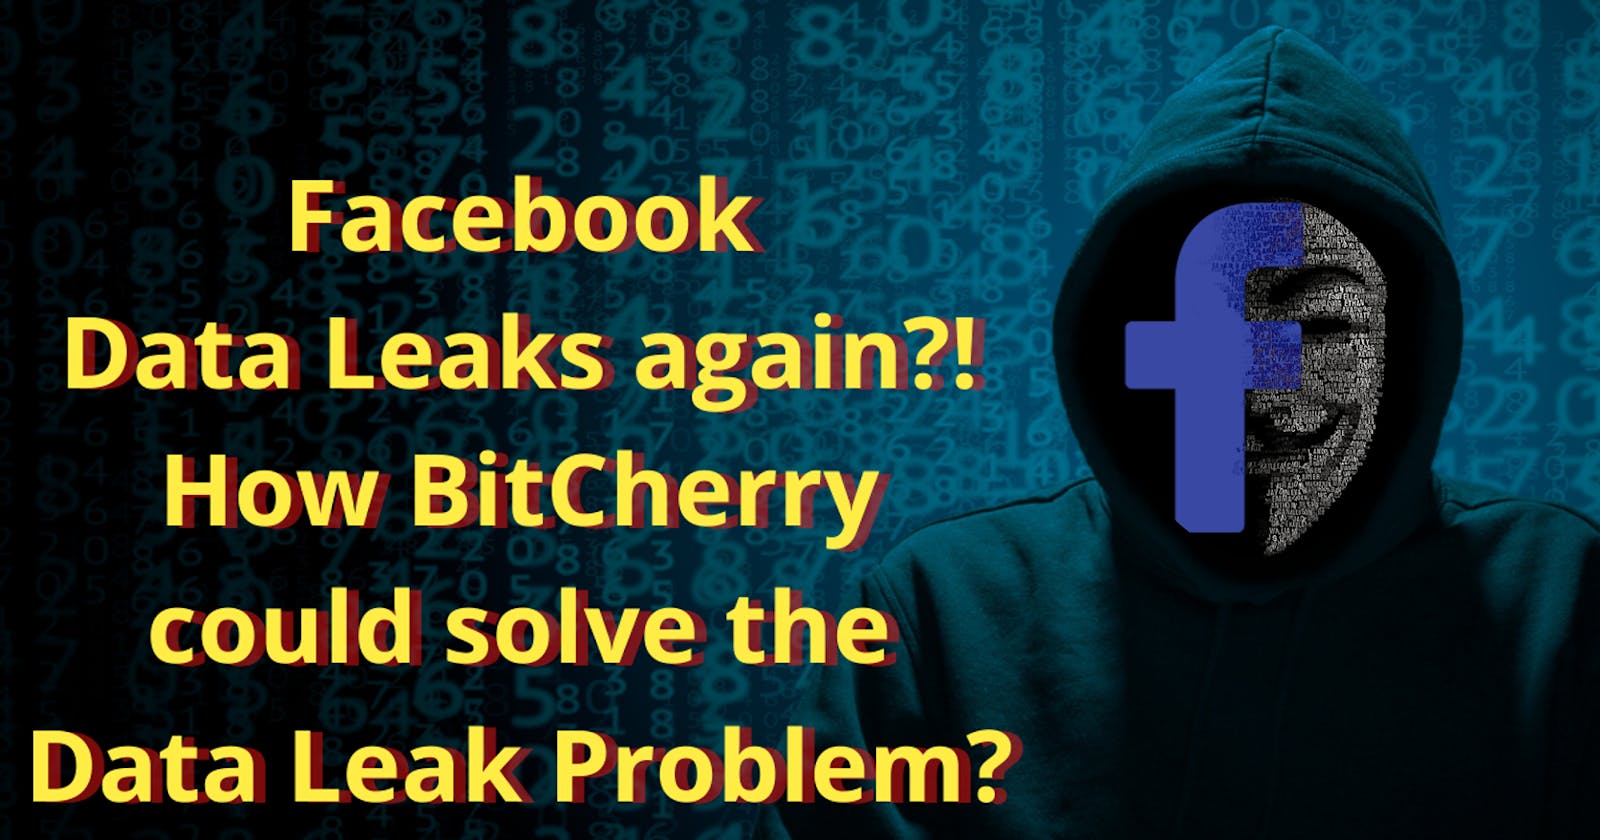 Facebook data leaks again?! How BitCherry could really solve the data leak problem?